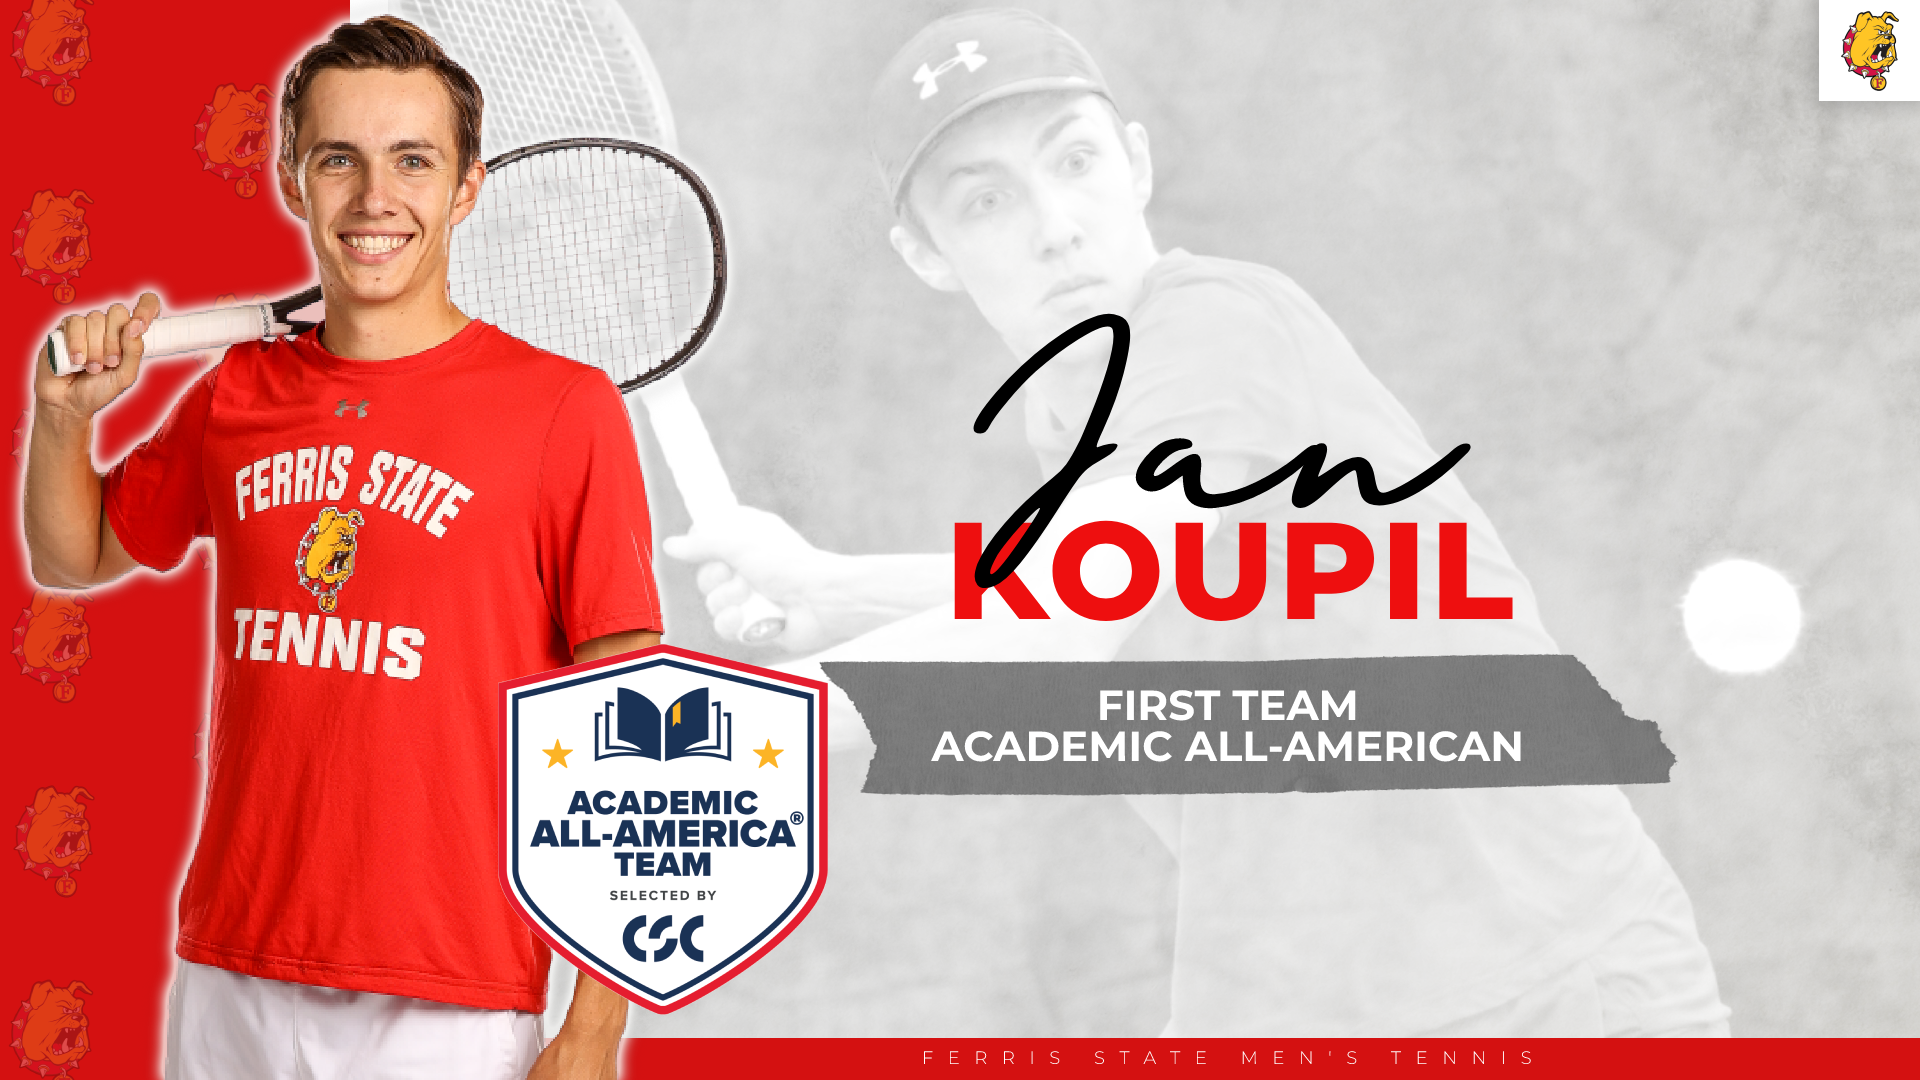 Ferris State's Jan Koupil Earns Academic All-America First Team Honors